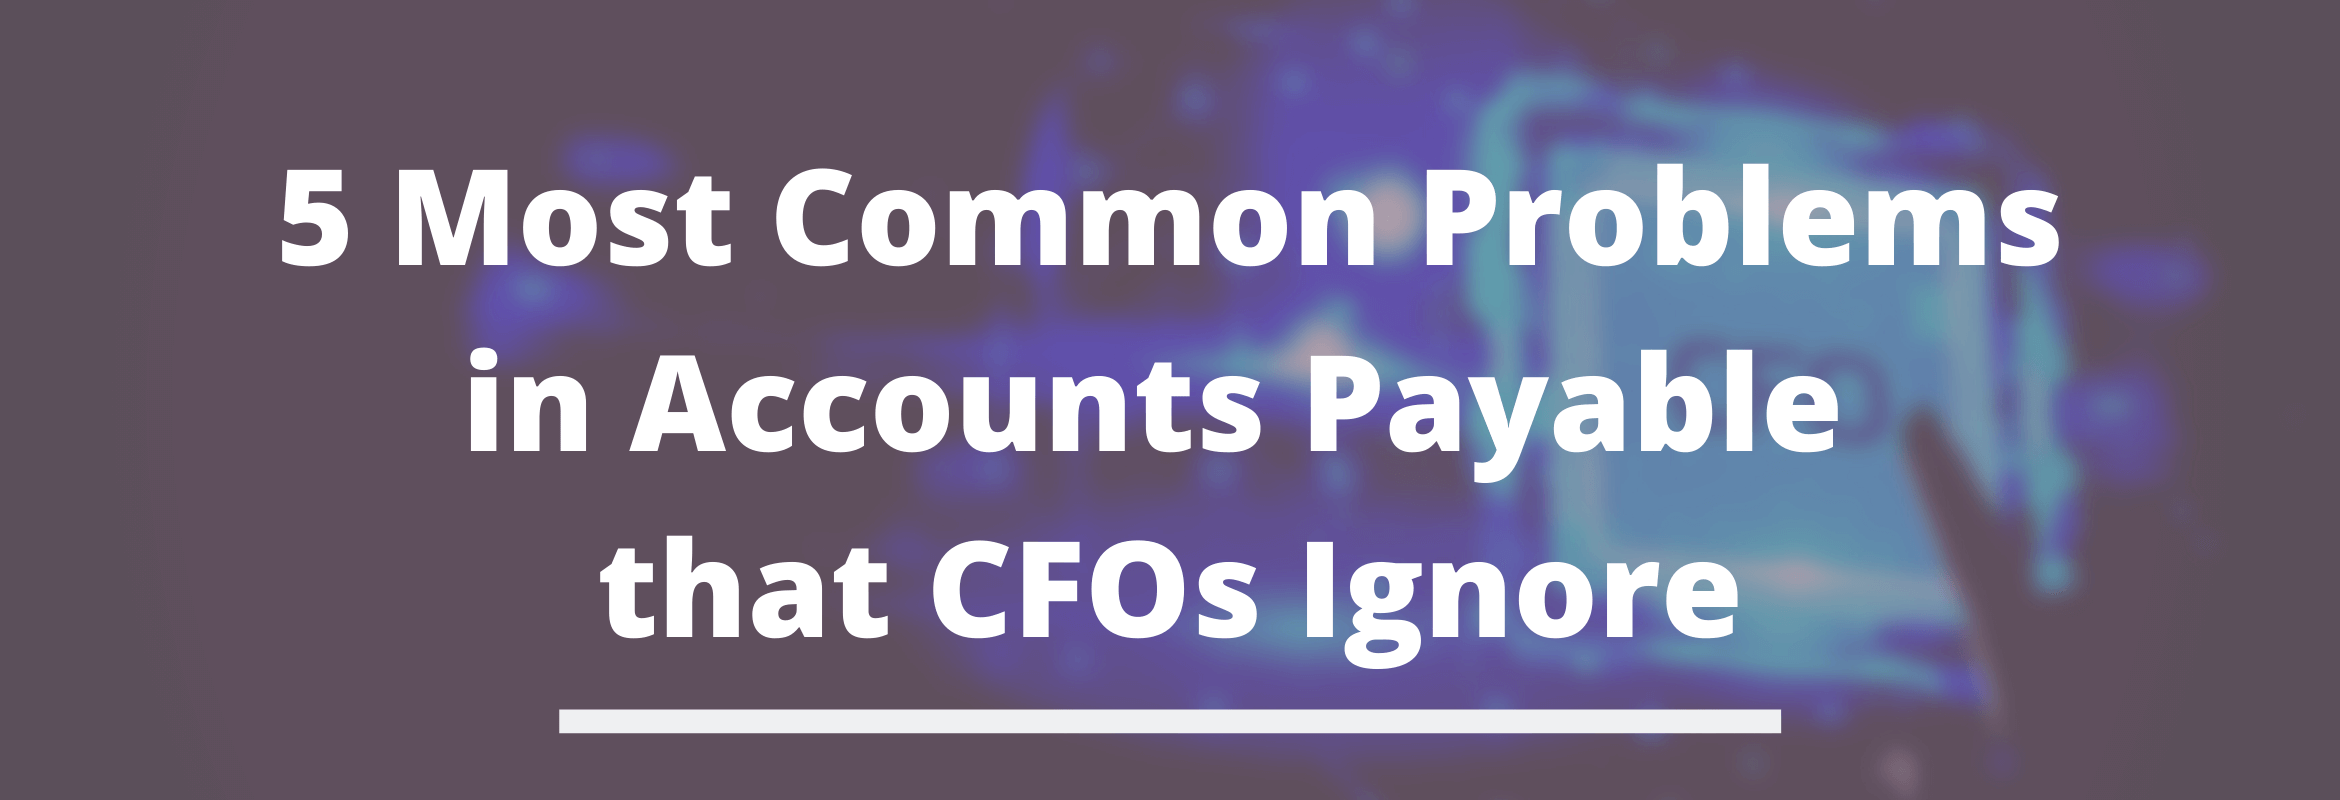 accounts payable problems for the CFO 